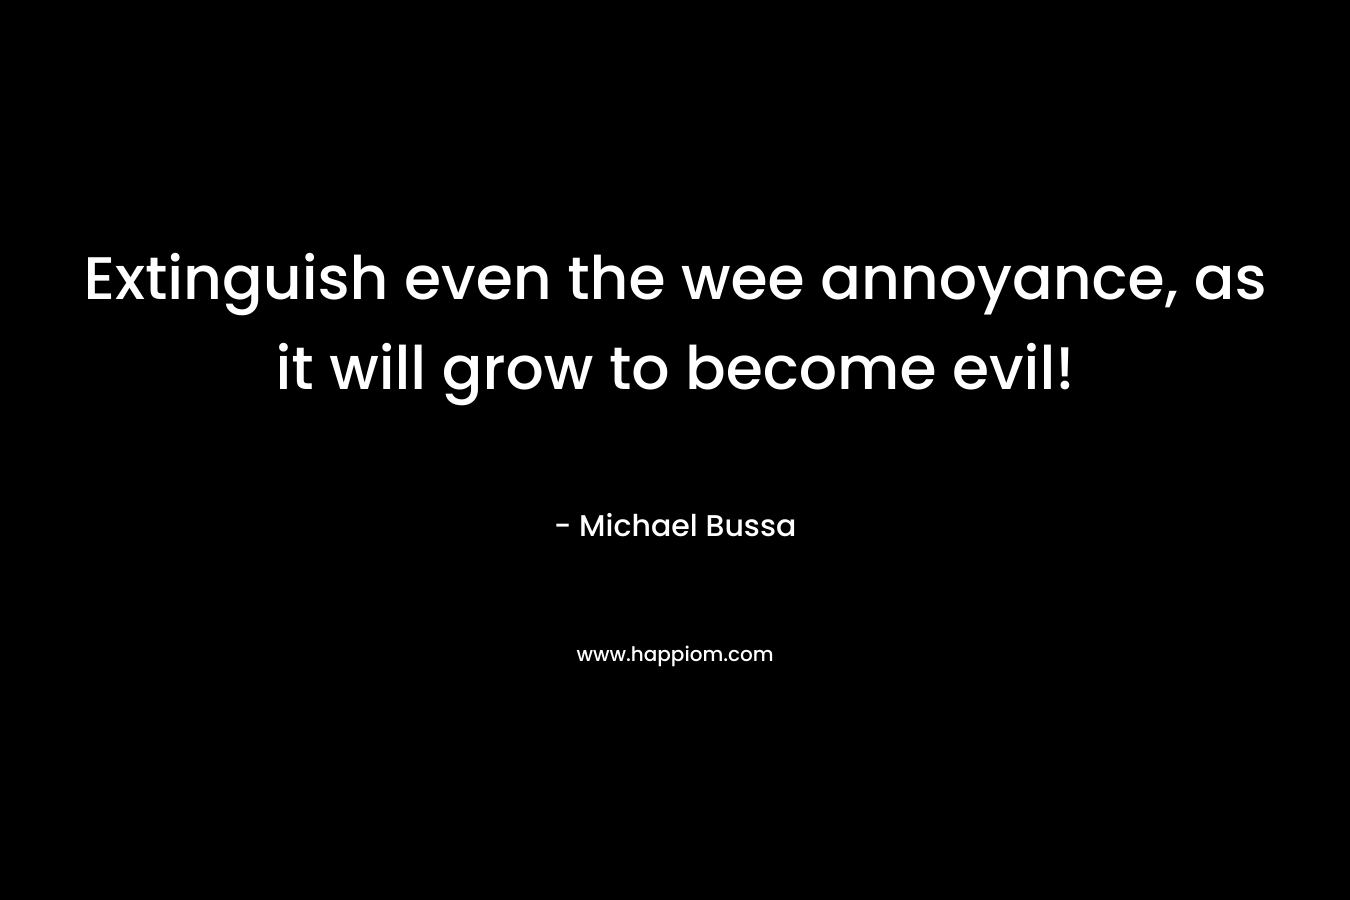 Extinguish even the wee annoyance, as it will grow to become evil! – Michael Bussa